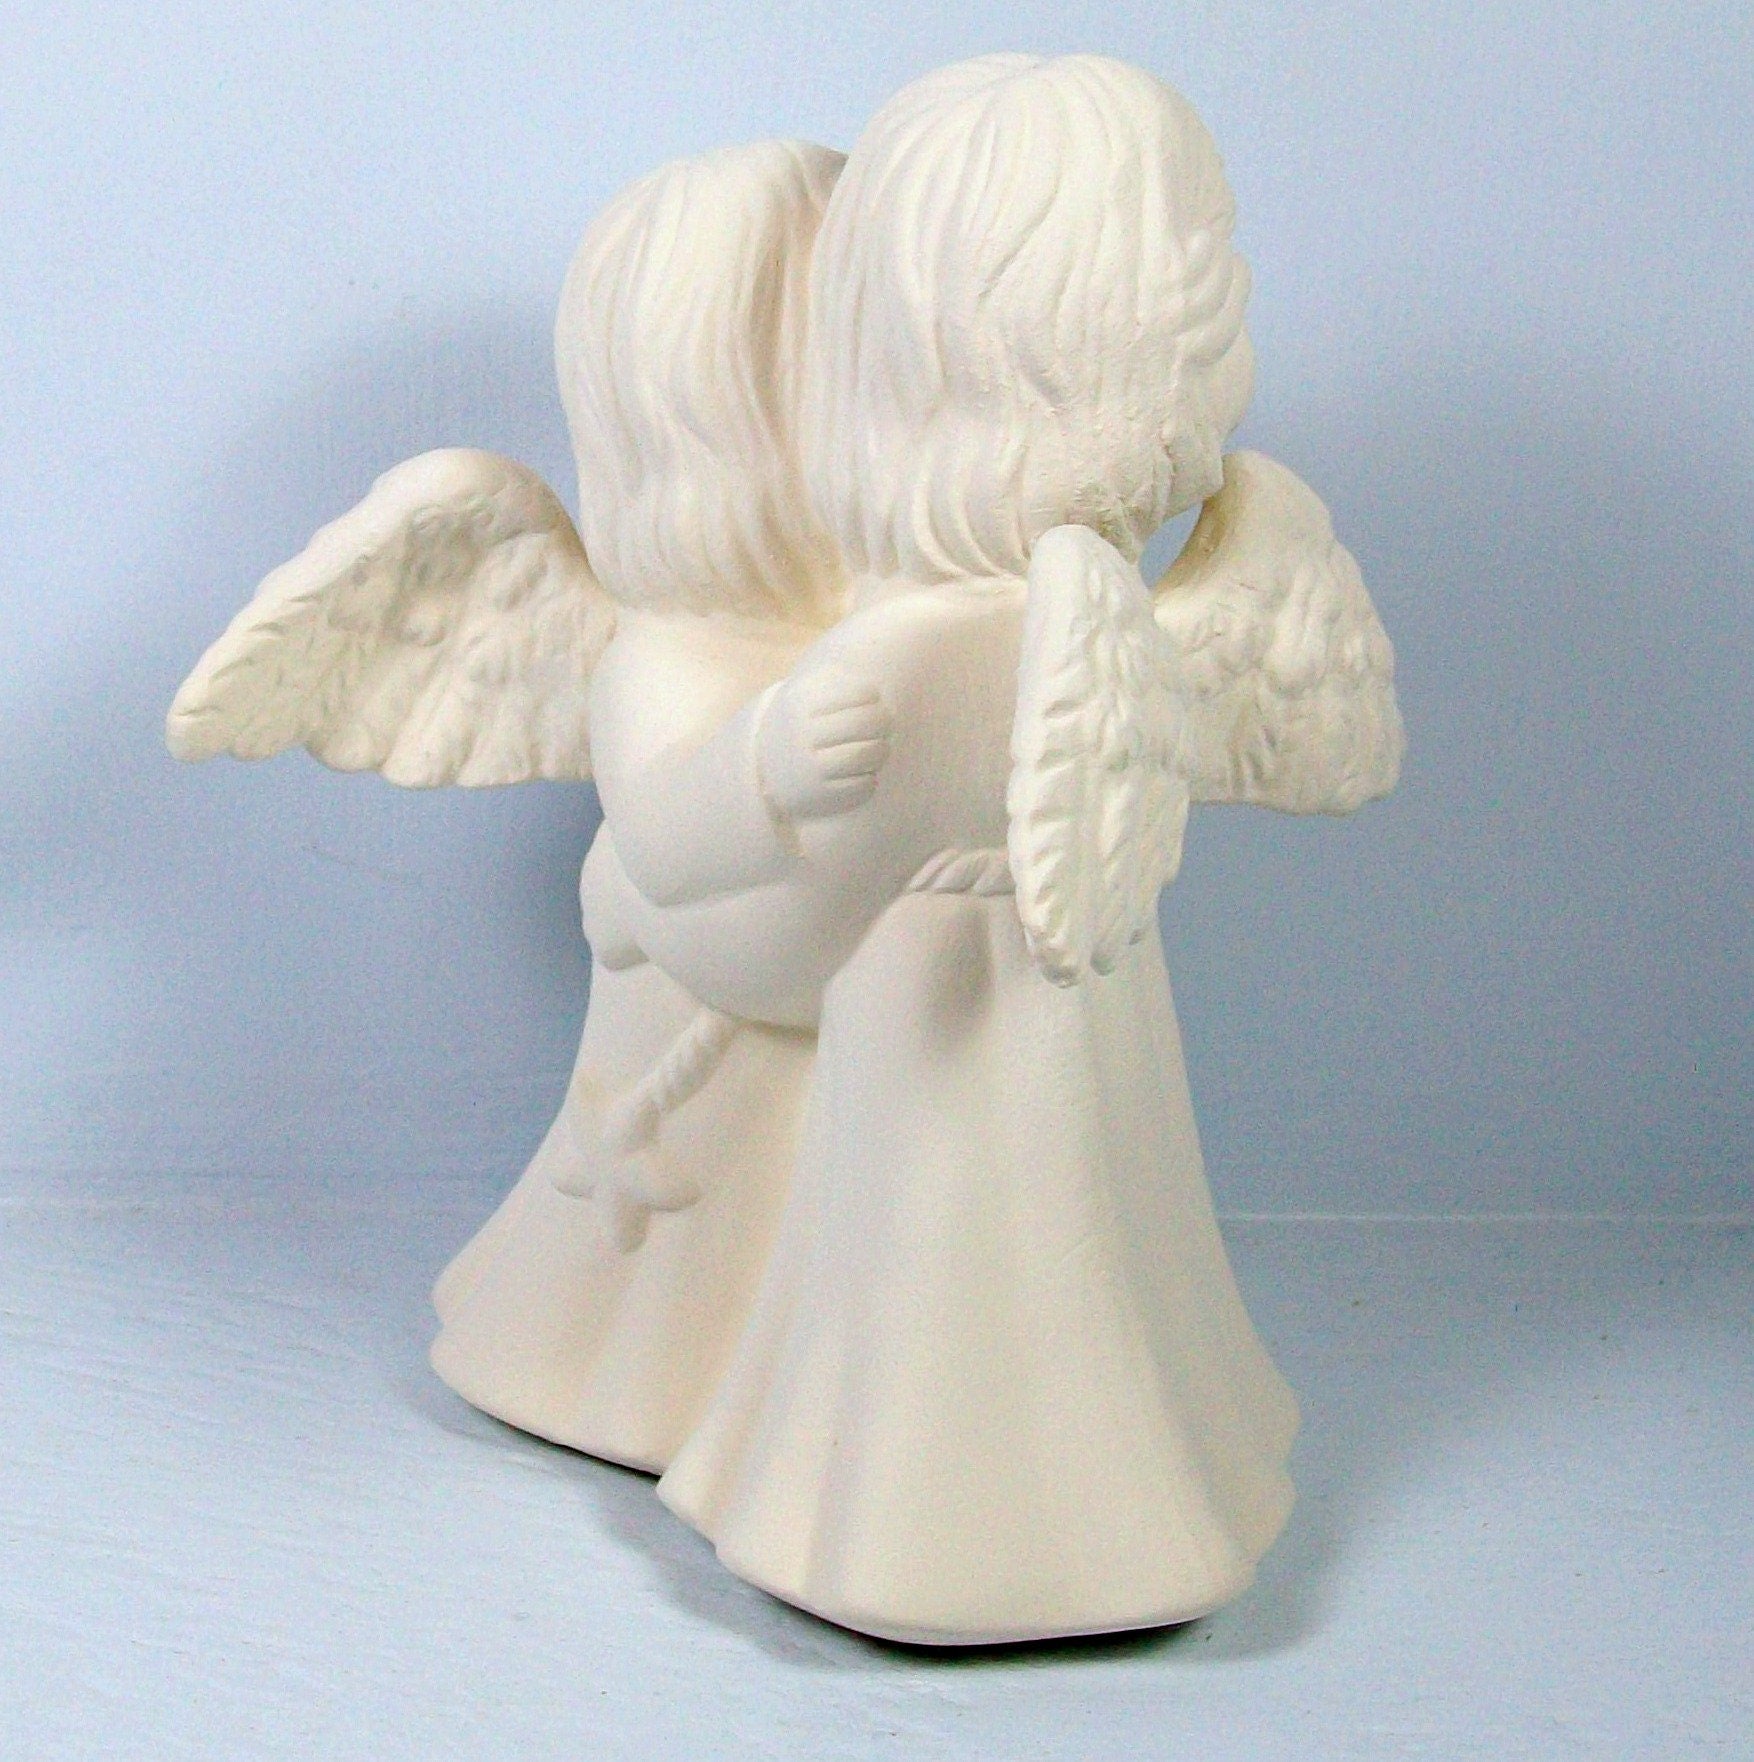 back view of taller angel in ready to paint ceramic hugging angel statues on a blue background